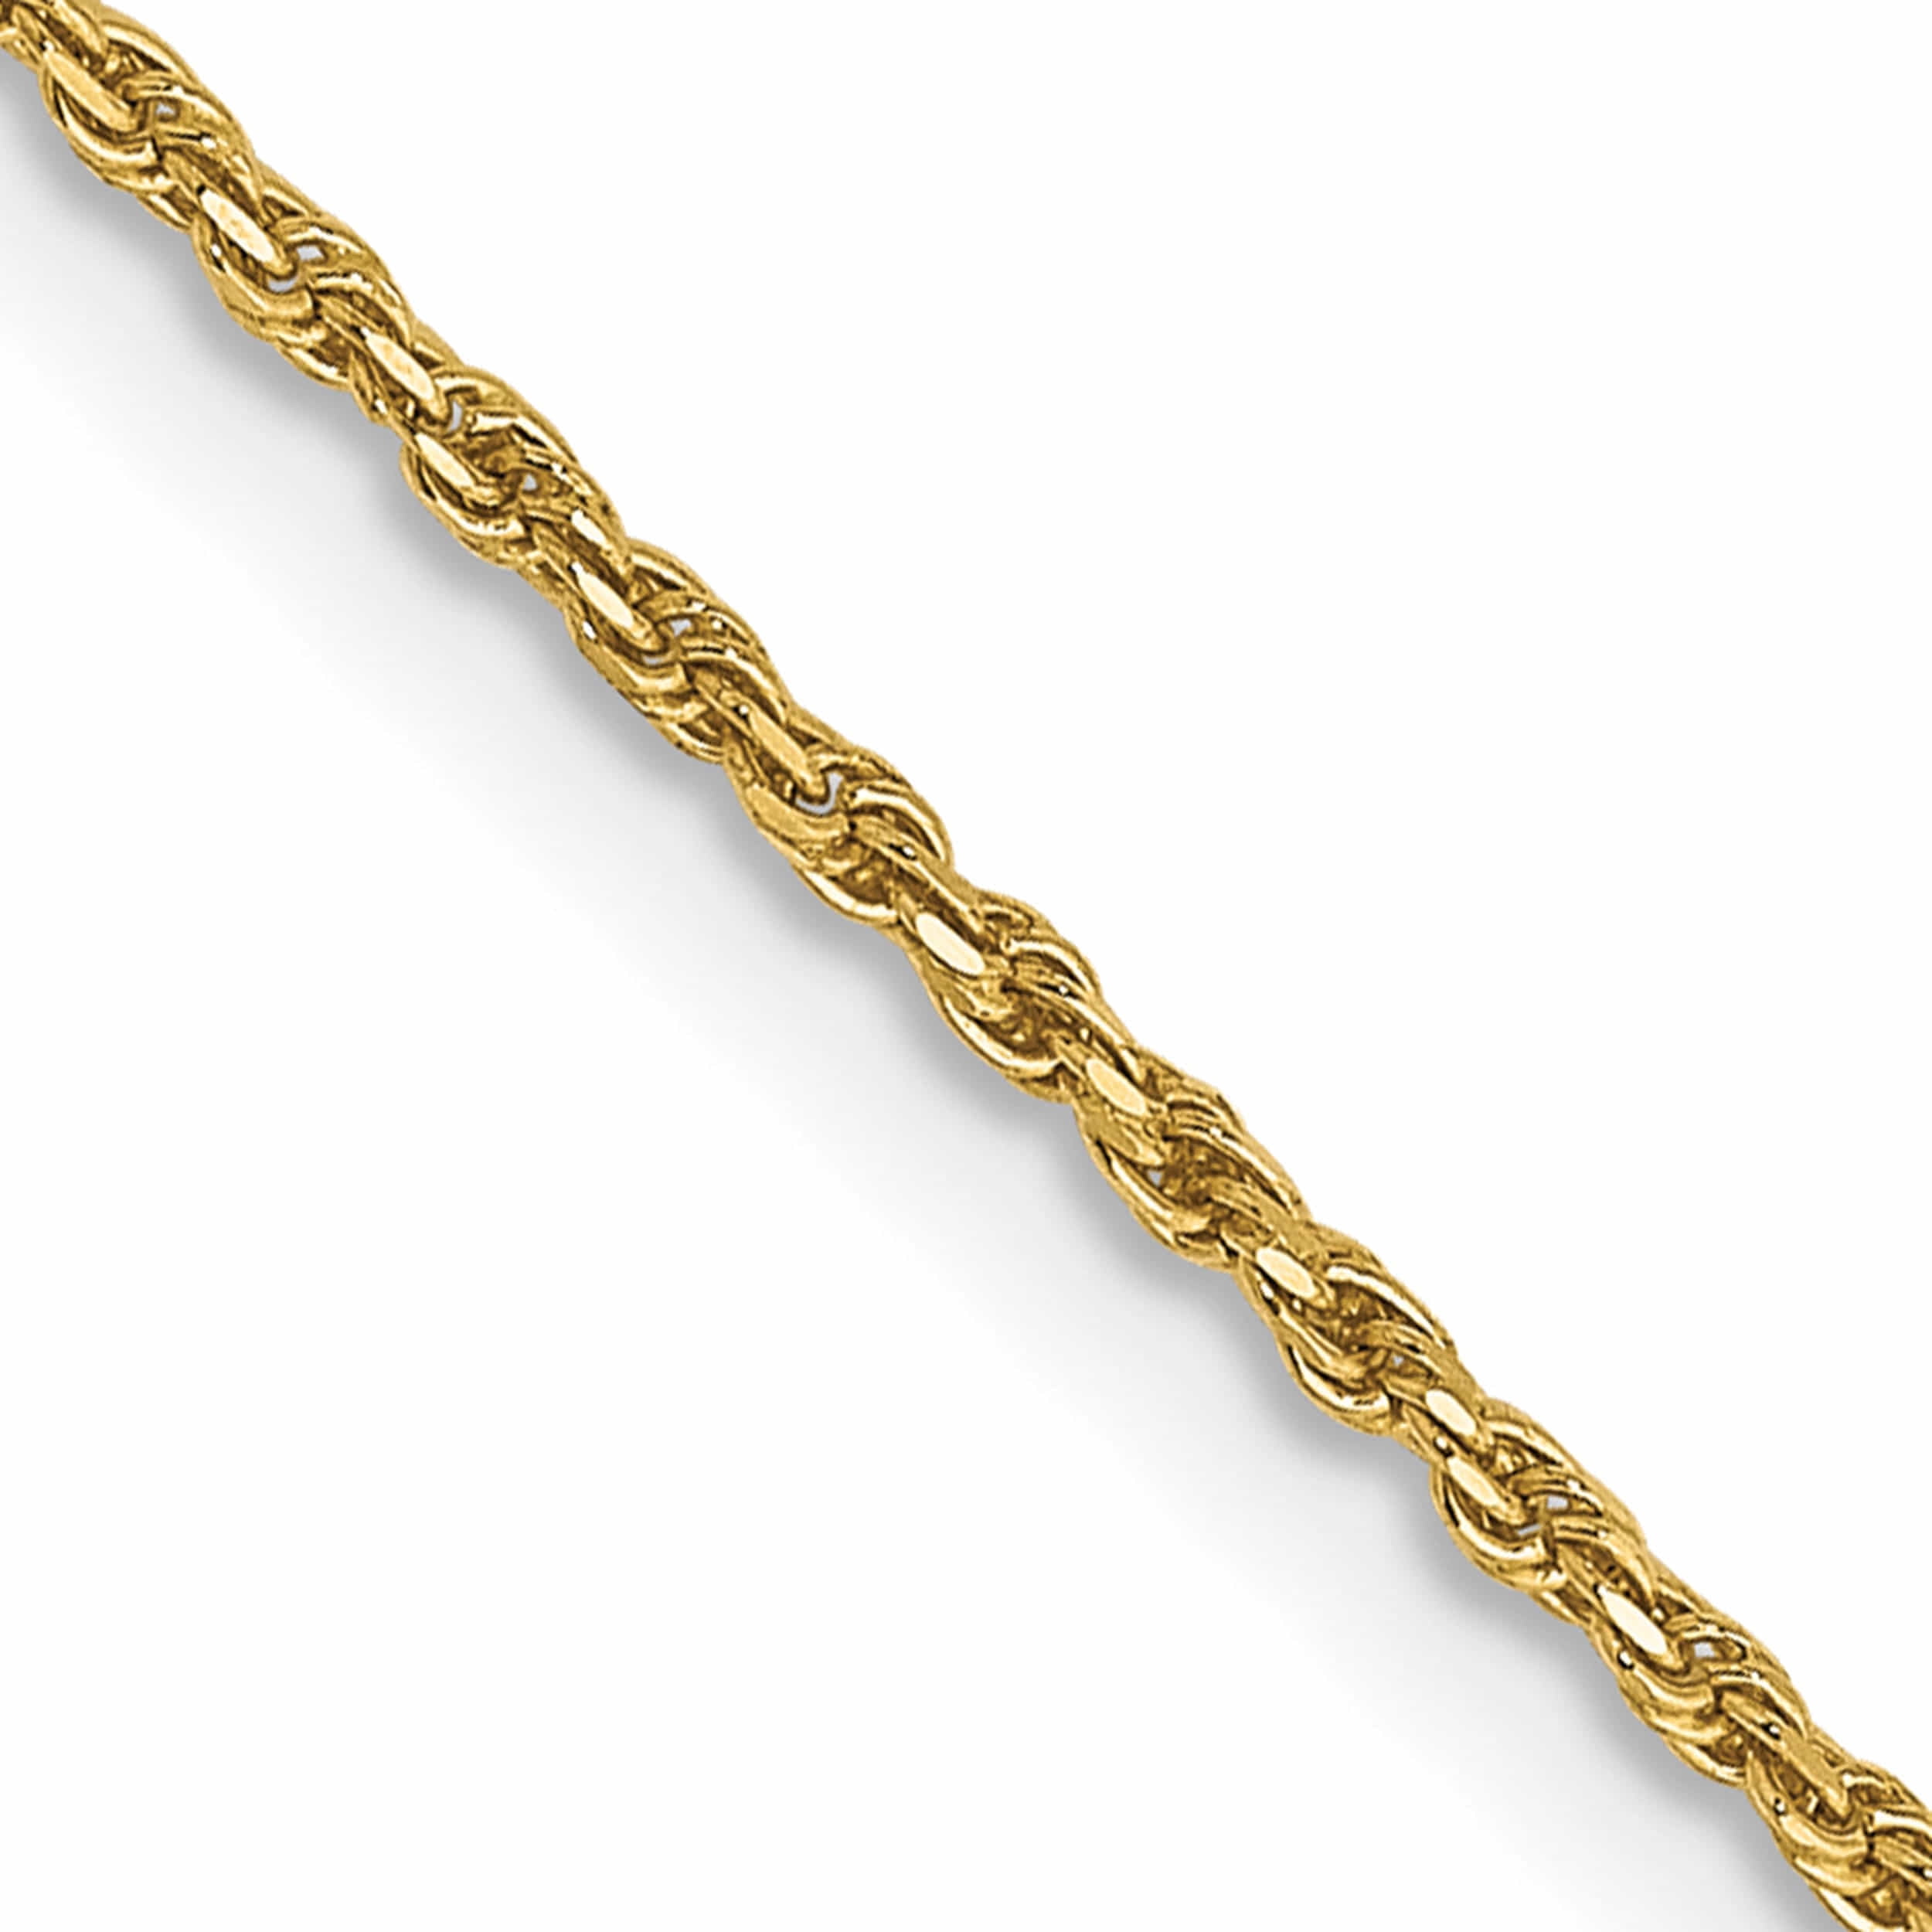 14K Yellow Gold 1.15mm Machine-Made Rope Chain Anklet 10 IN